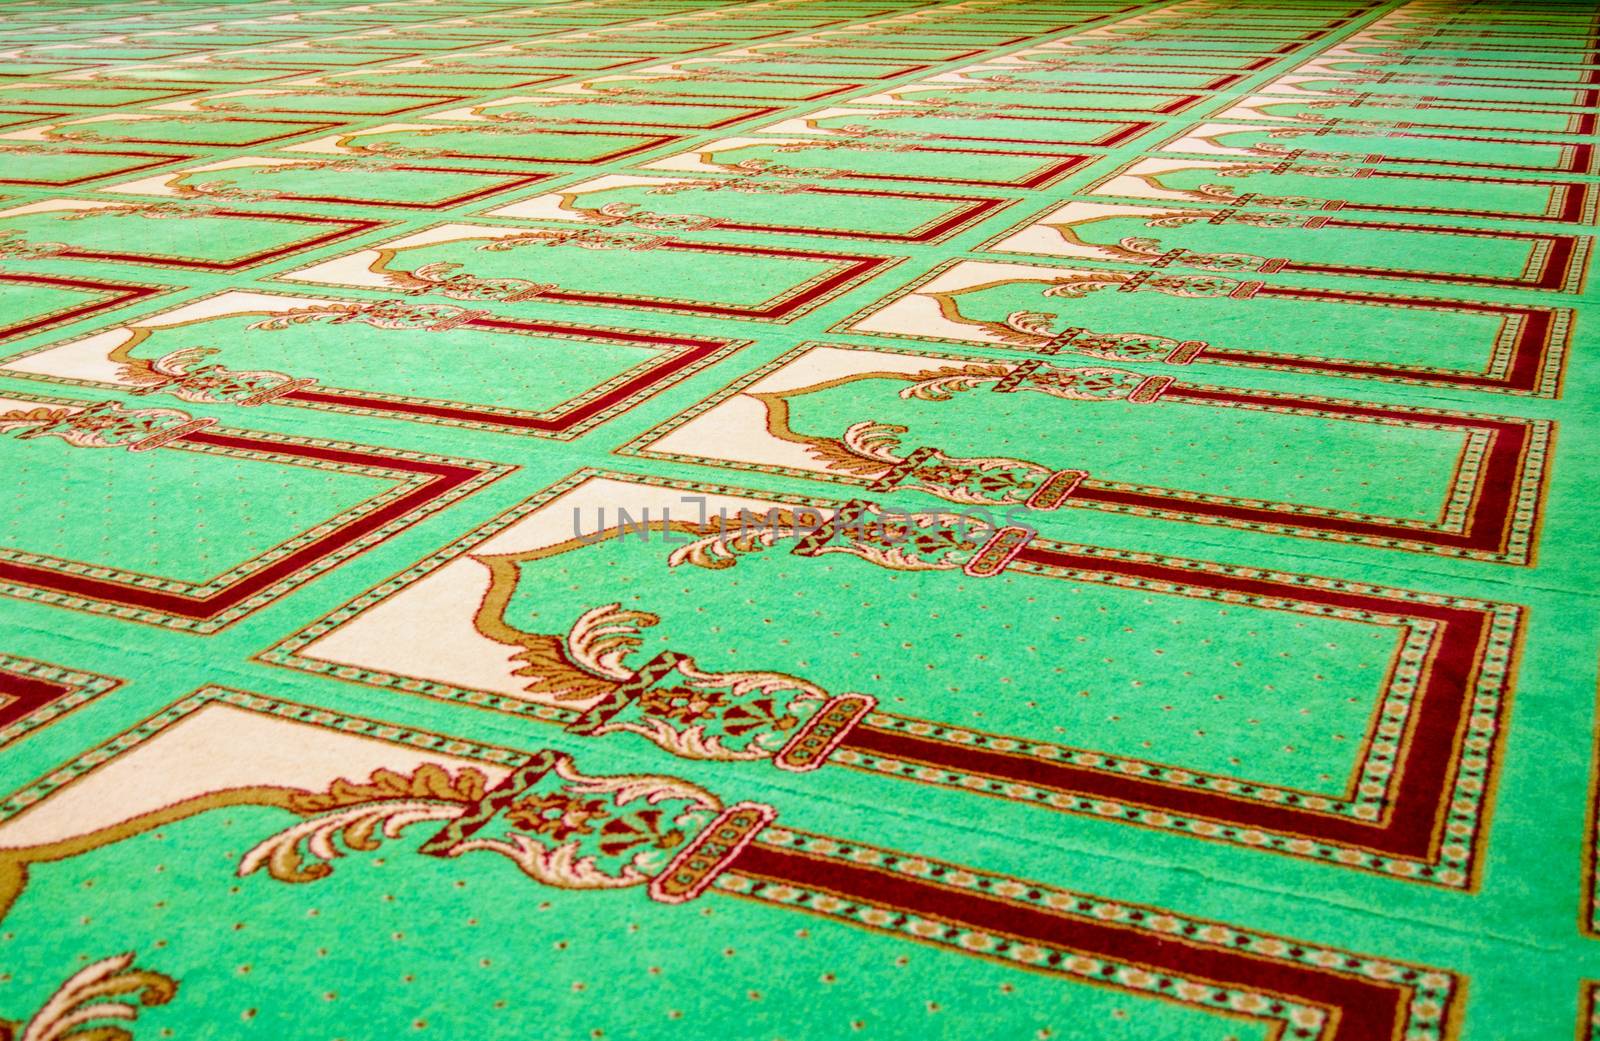 Prayer carpet in a mosque by BasPhoto